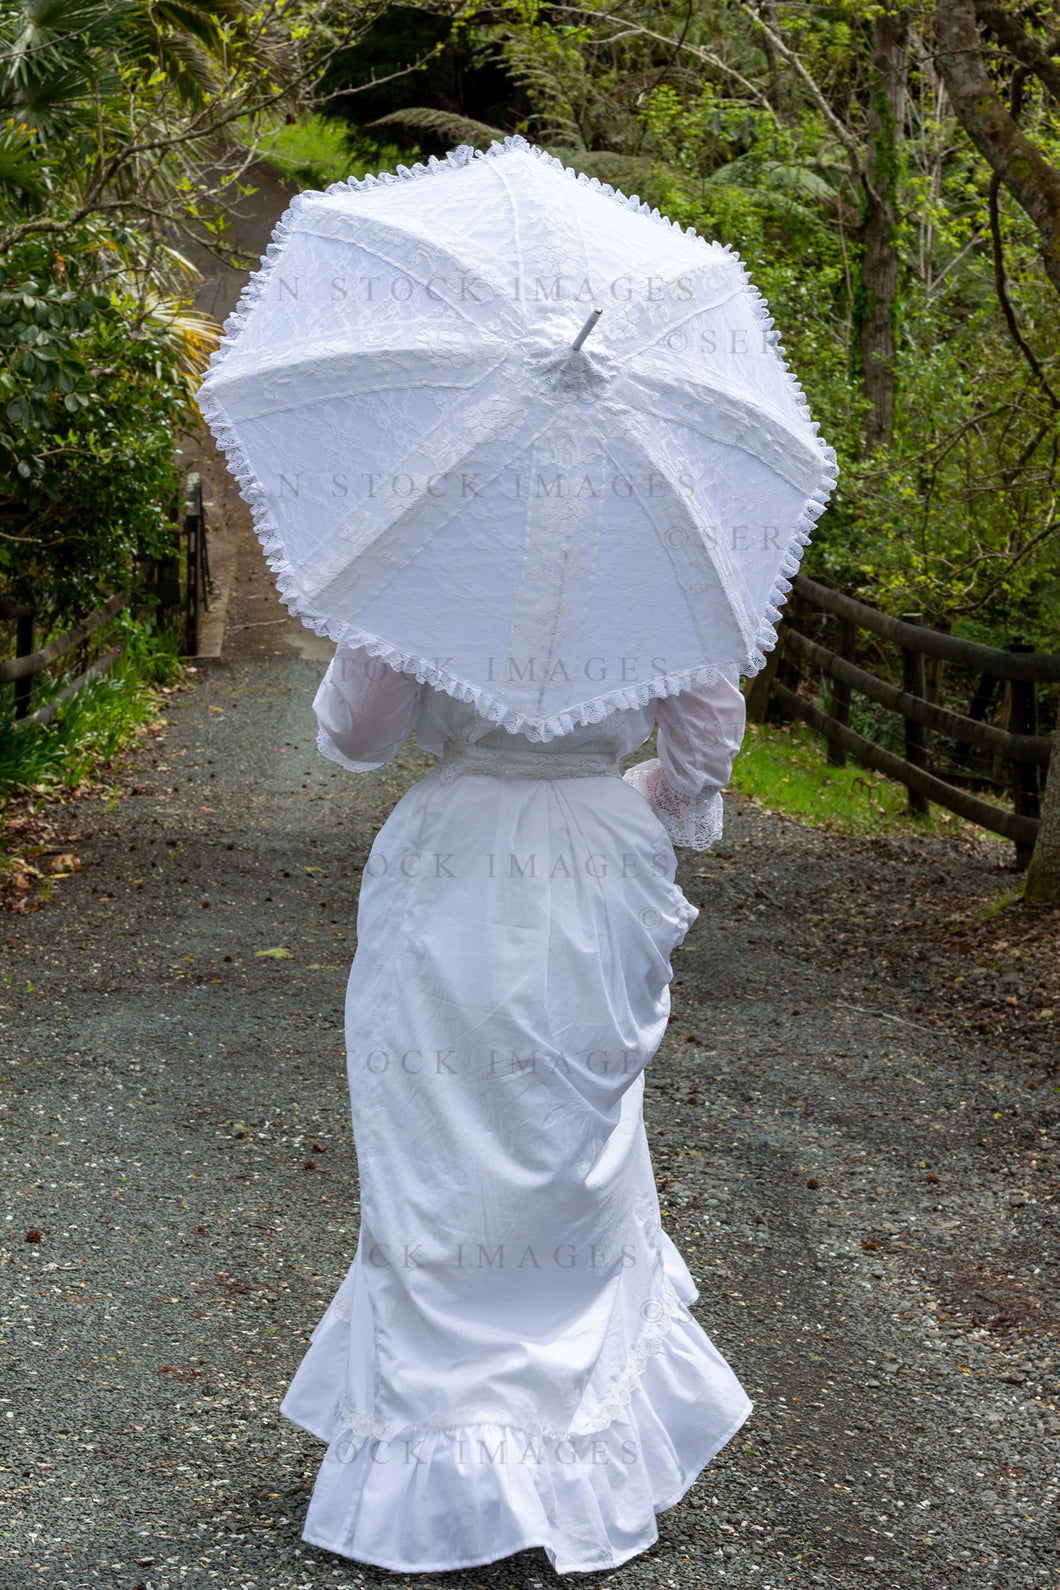 Edwardian woman in a white lace blouse and skirt holding a parasol and walking in a garden (Tayla 0206)